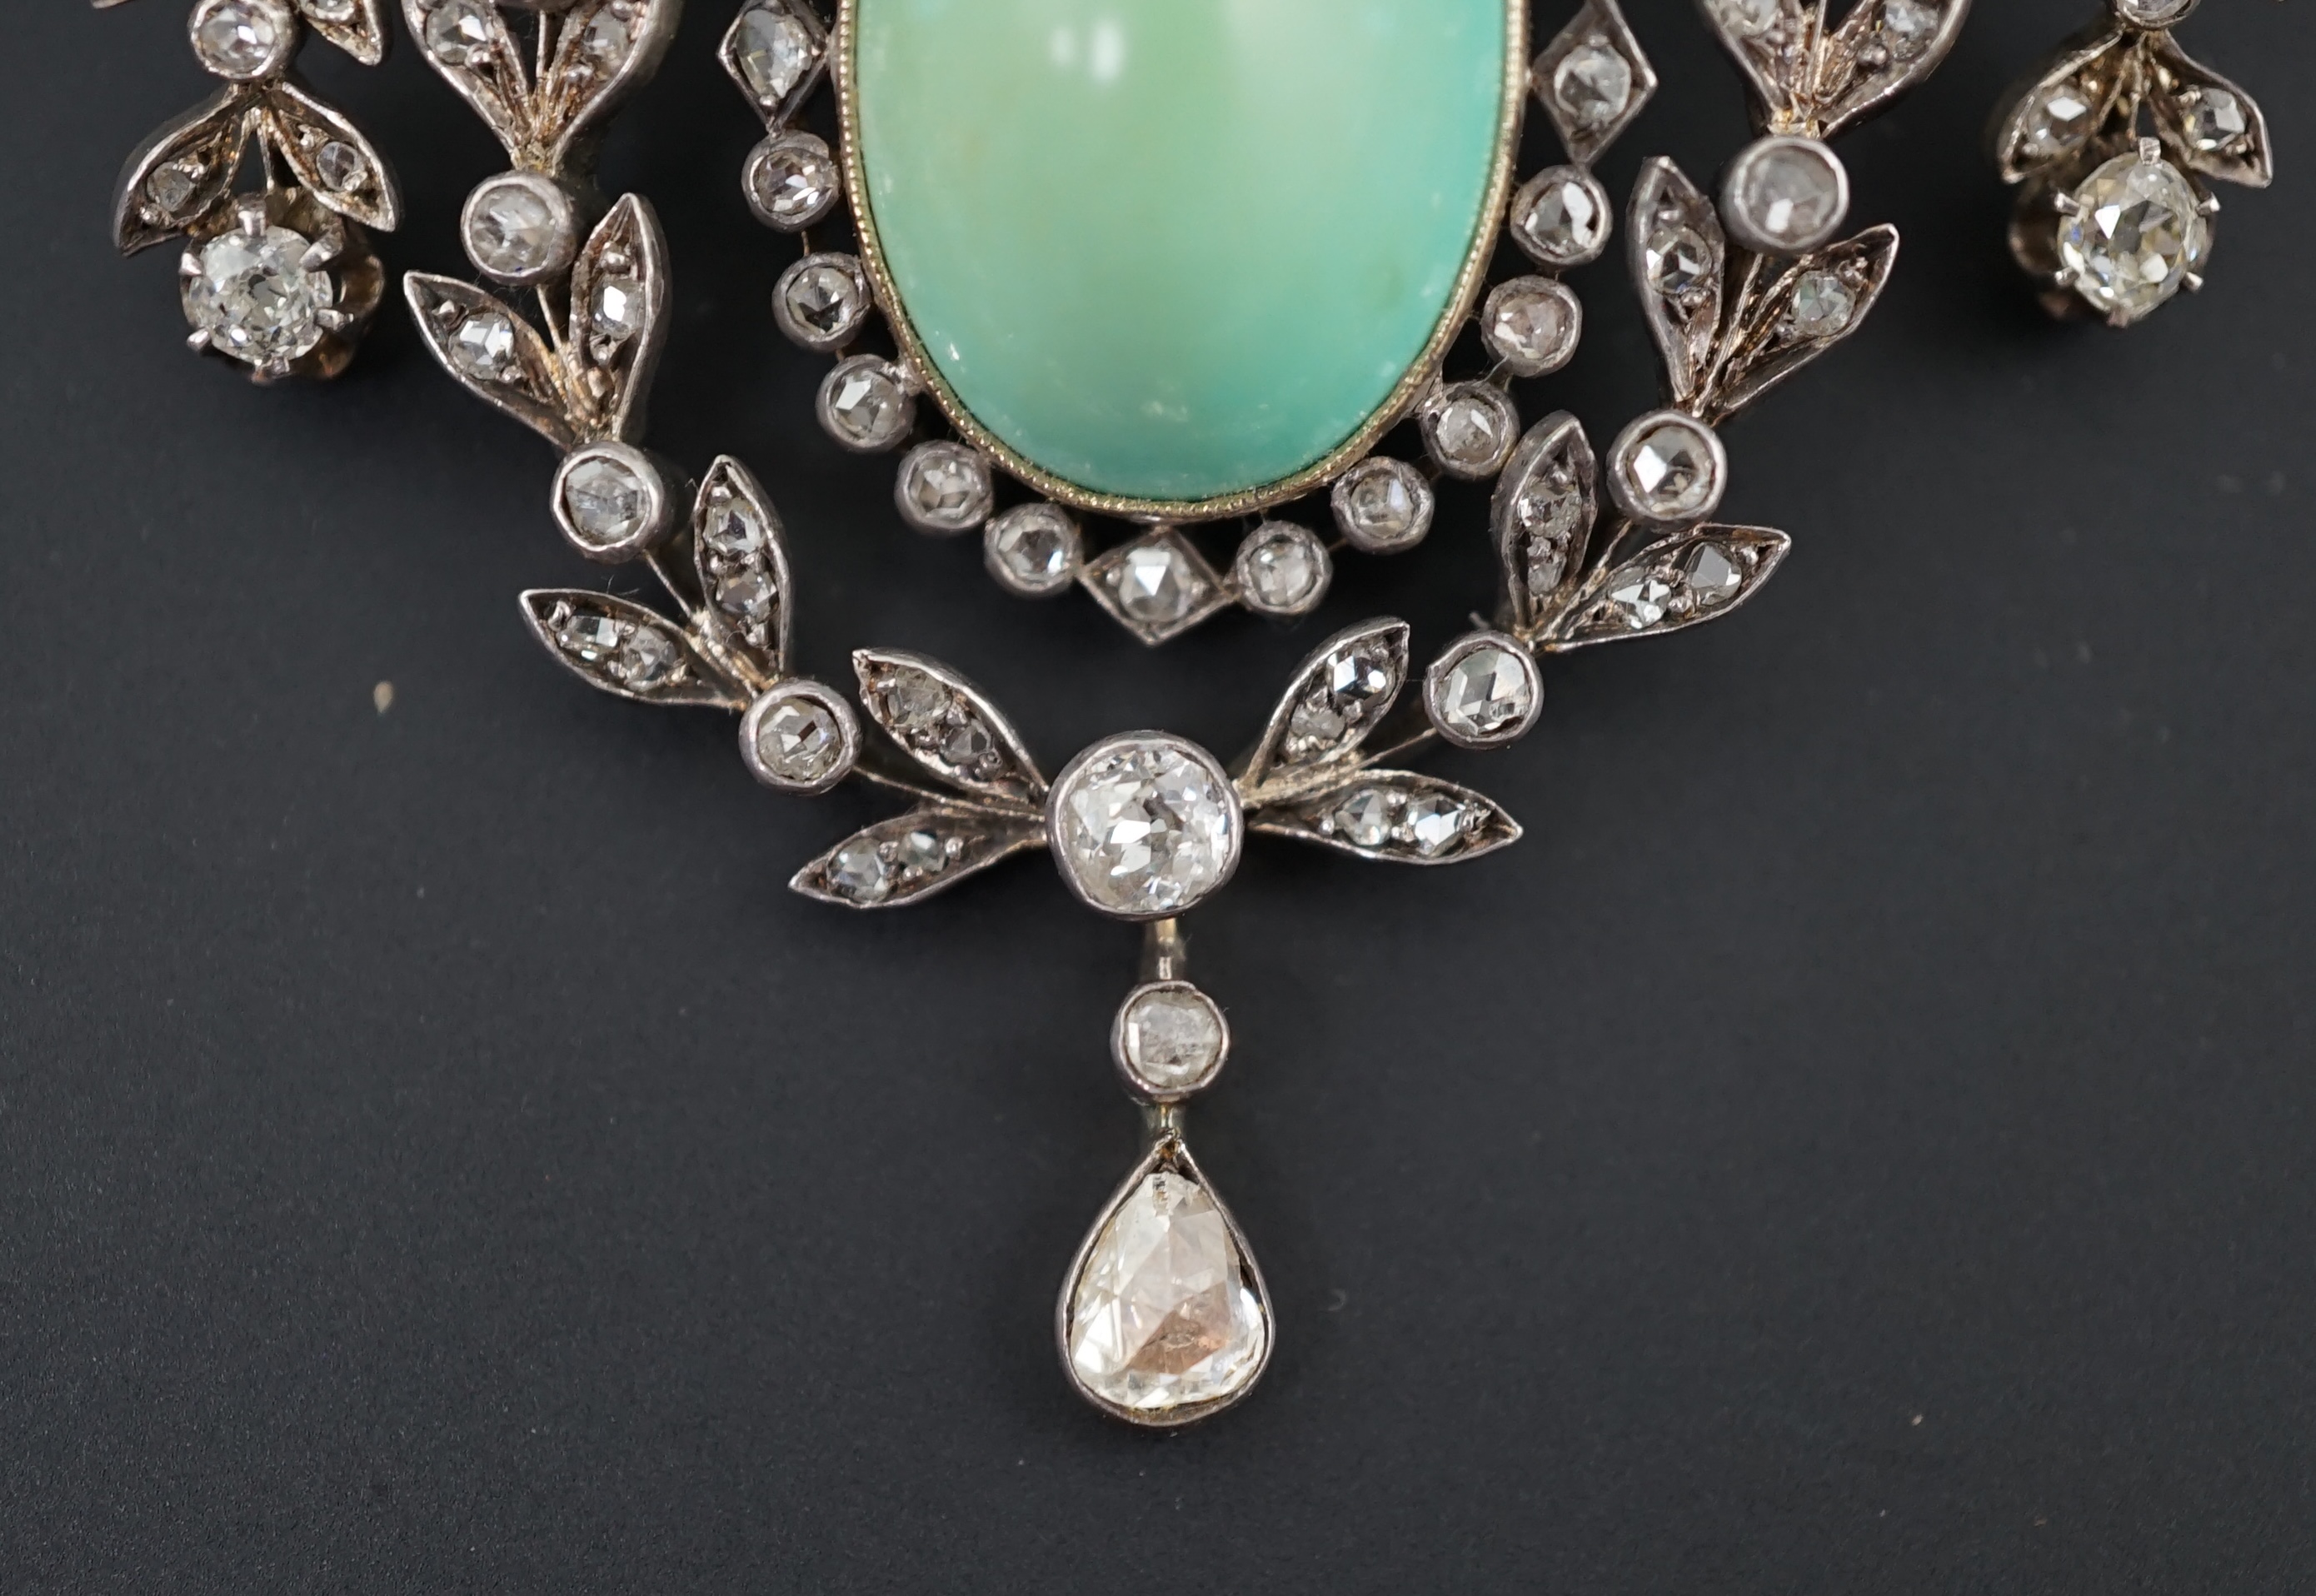 An Edwardian gold and silver, diamond and turquoise set drop pendant brooch